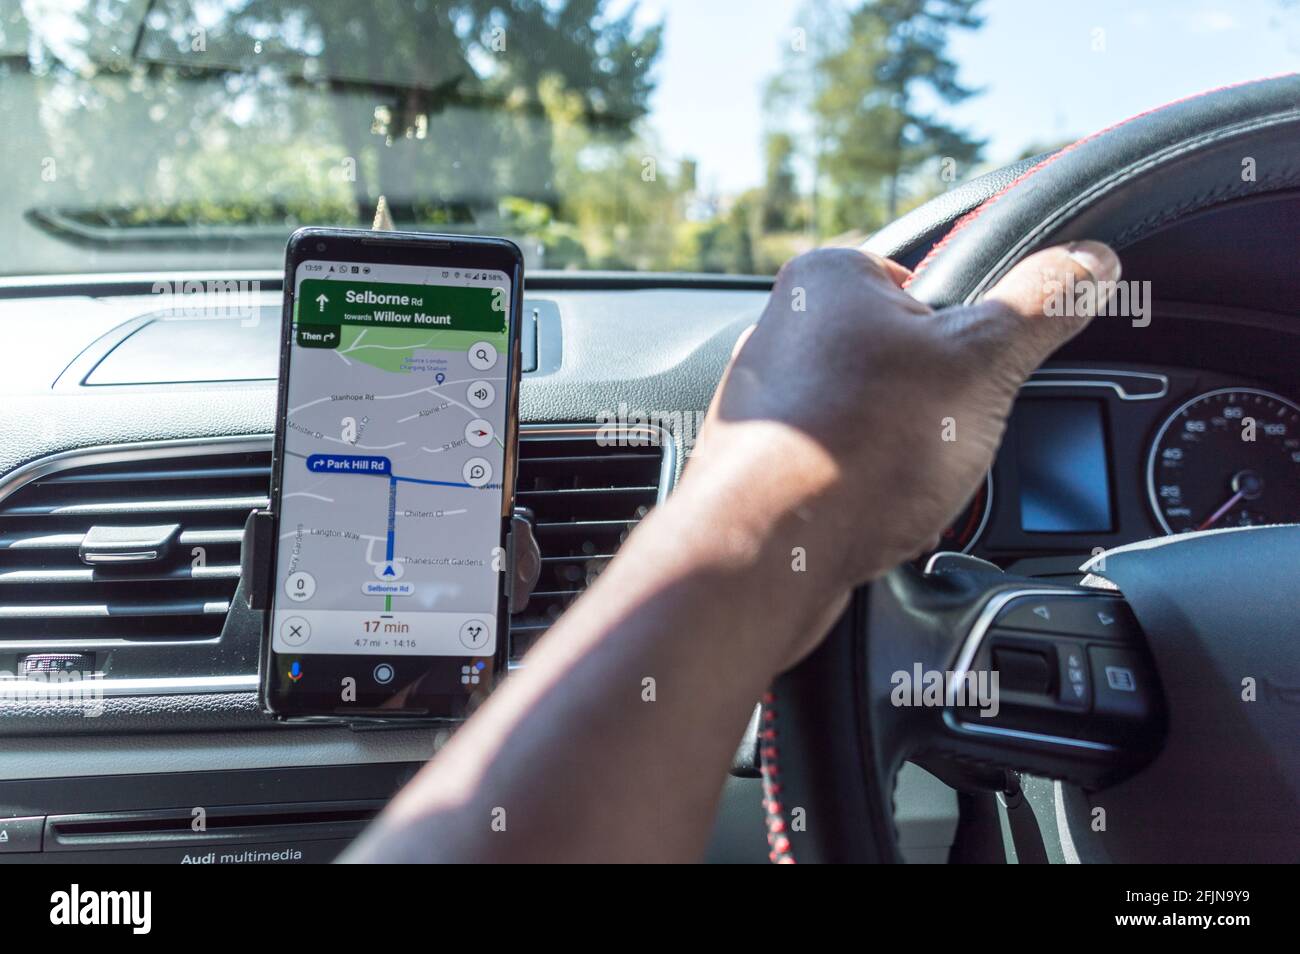 Google maps app GPS on smarphone in car with view of steering wheel and hands of driver Stock Photo